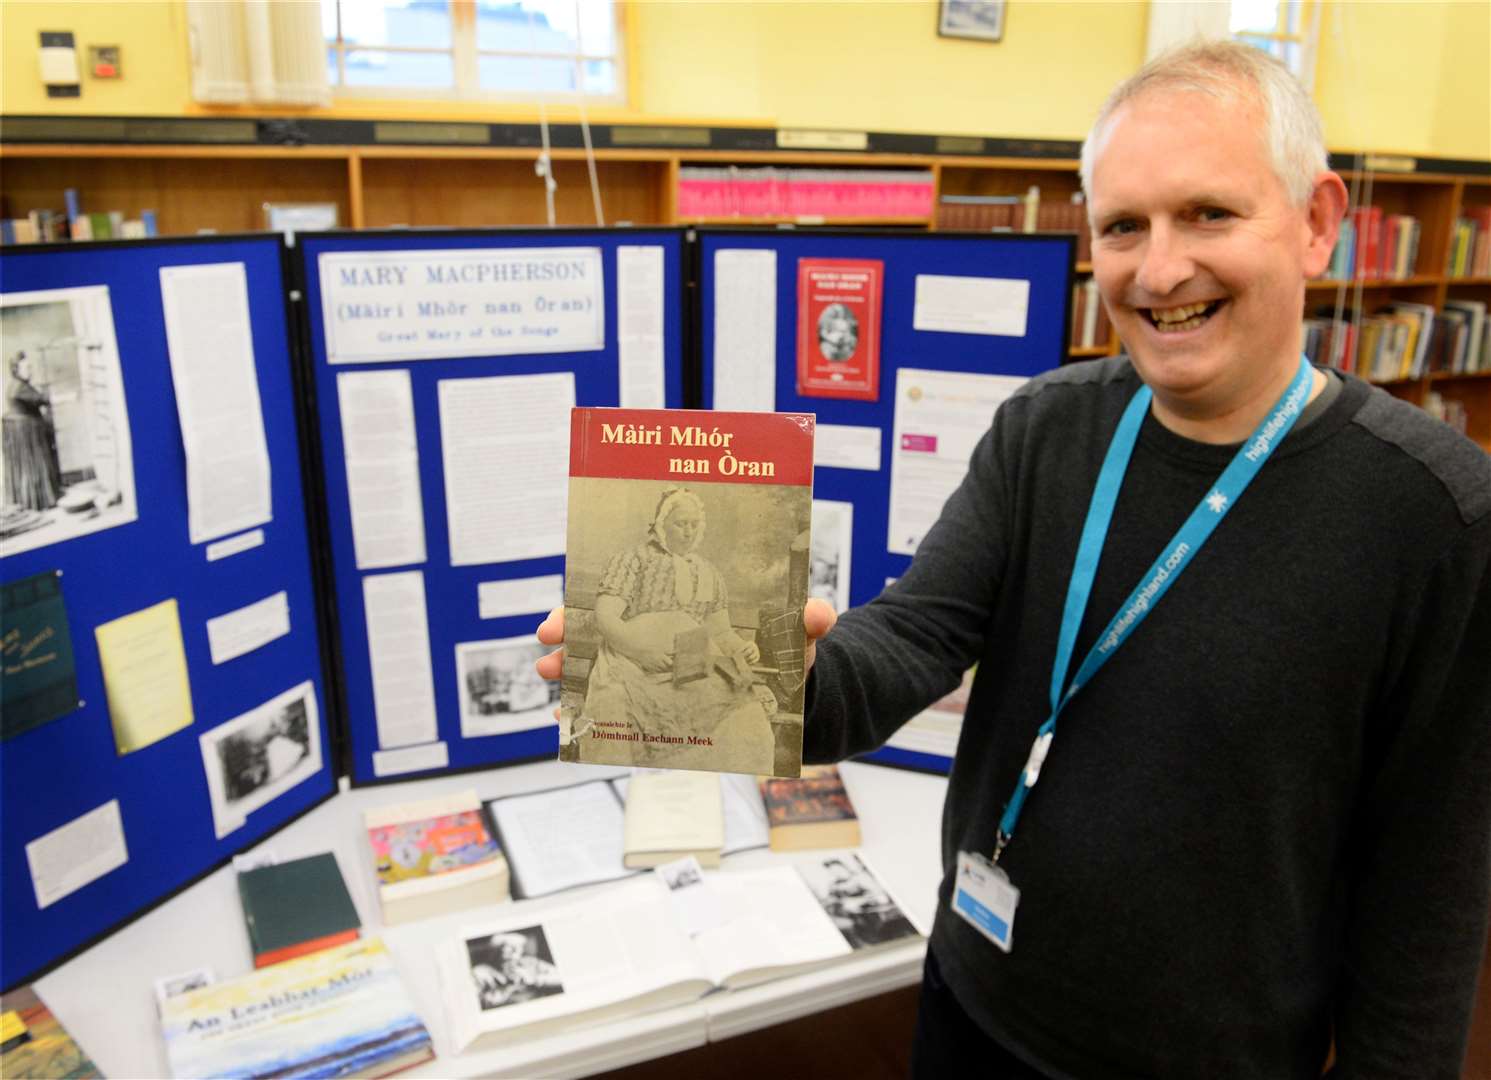 Librarian Andrew Lucas at the exhibition to mark the 200th anniversary of the birth of Gaelic poet Margaret MacPherson.